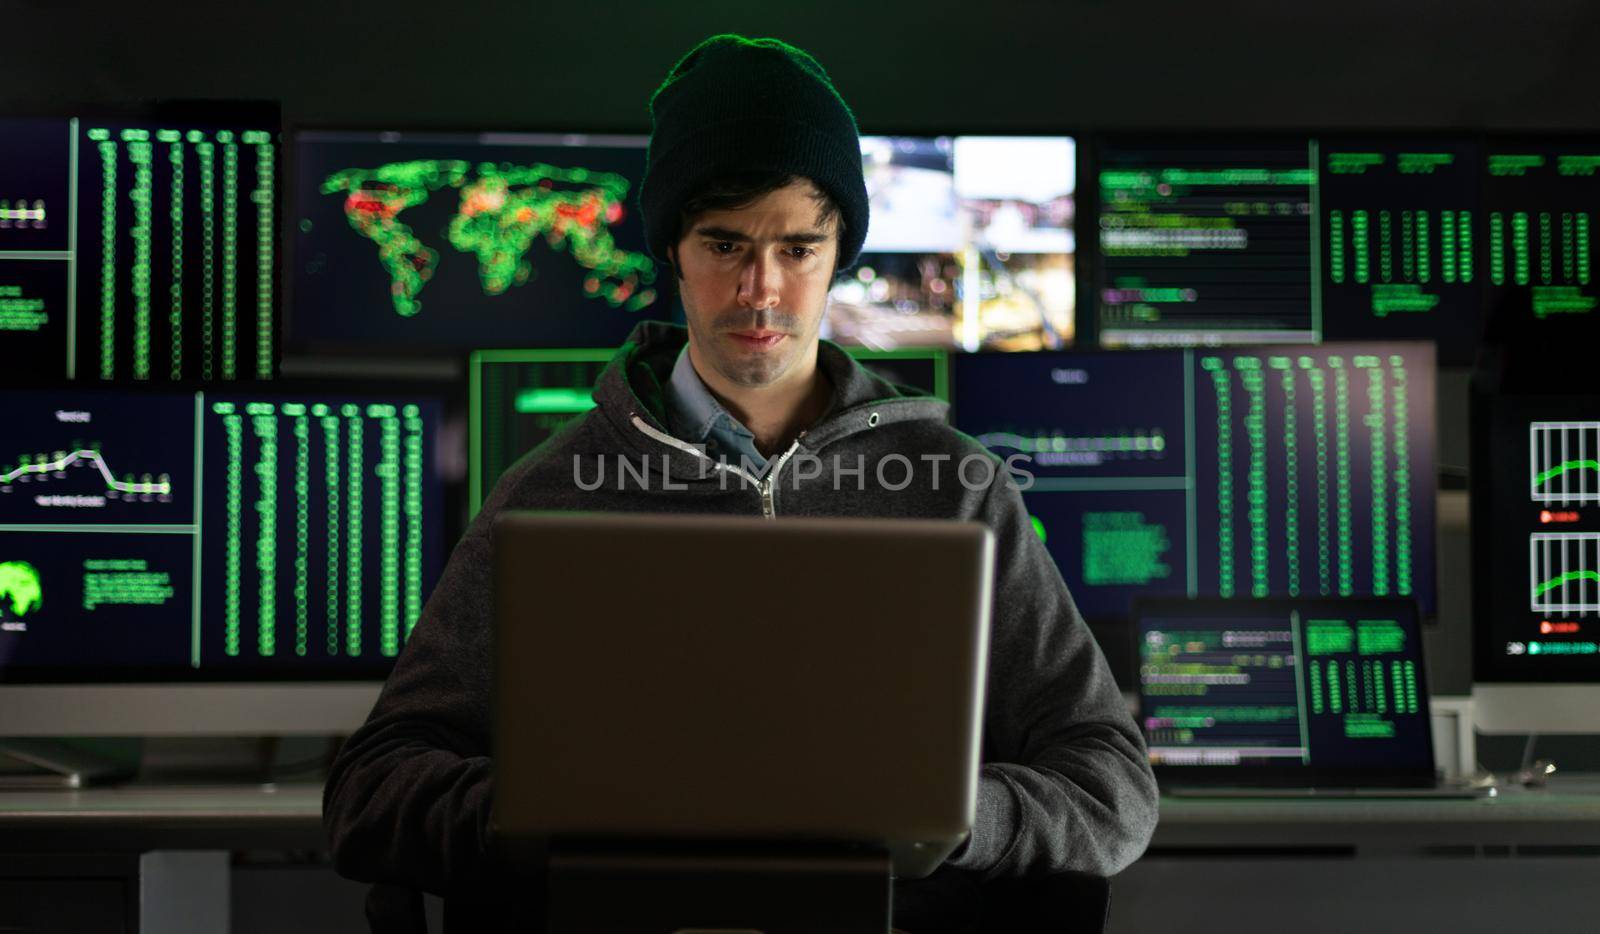 Male hacker using laptop breaks into into government data servers and infects system with virus. Multiple monitor screen background. Hacking concept.